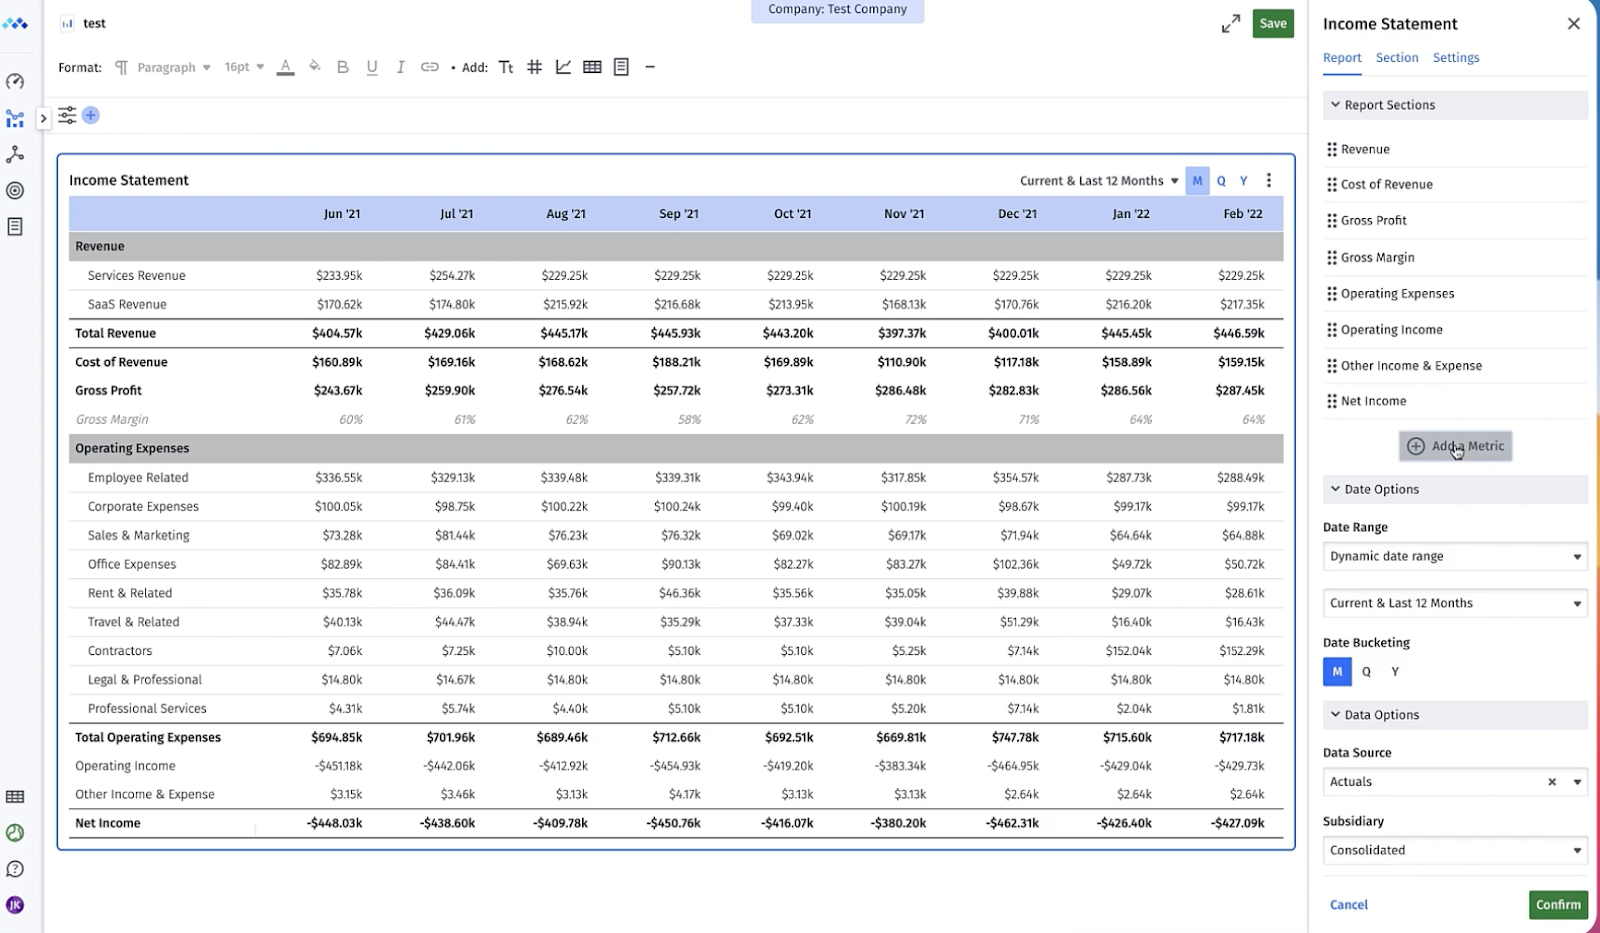 Select the “Add a Metric” button to add metrics to reports in Mosaic.